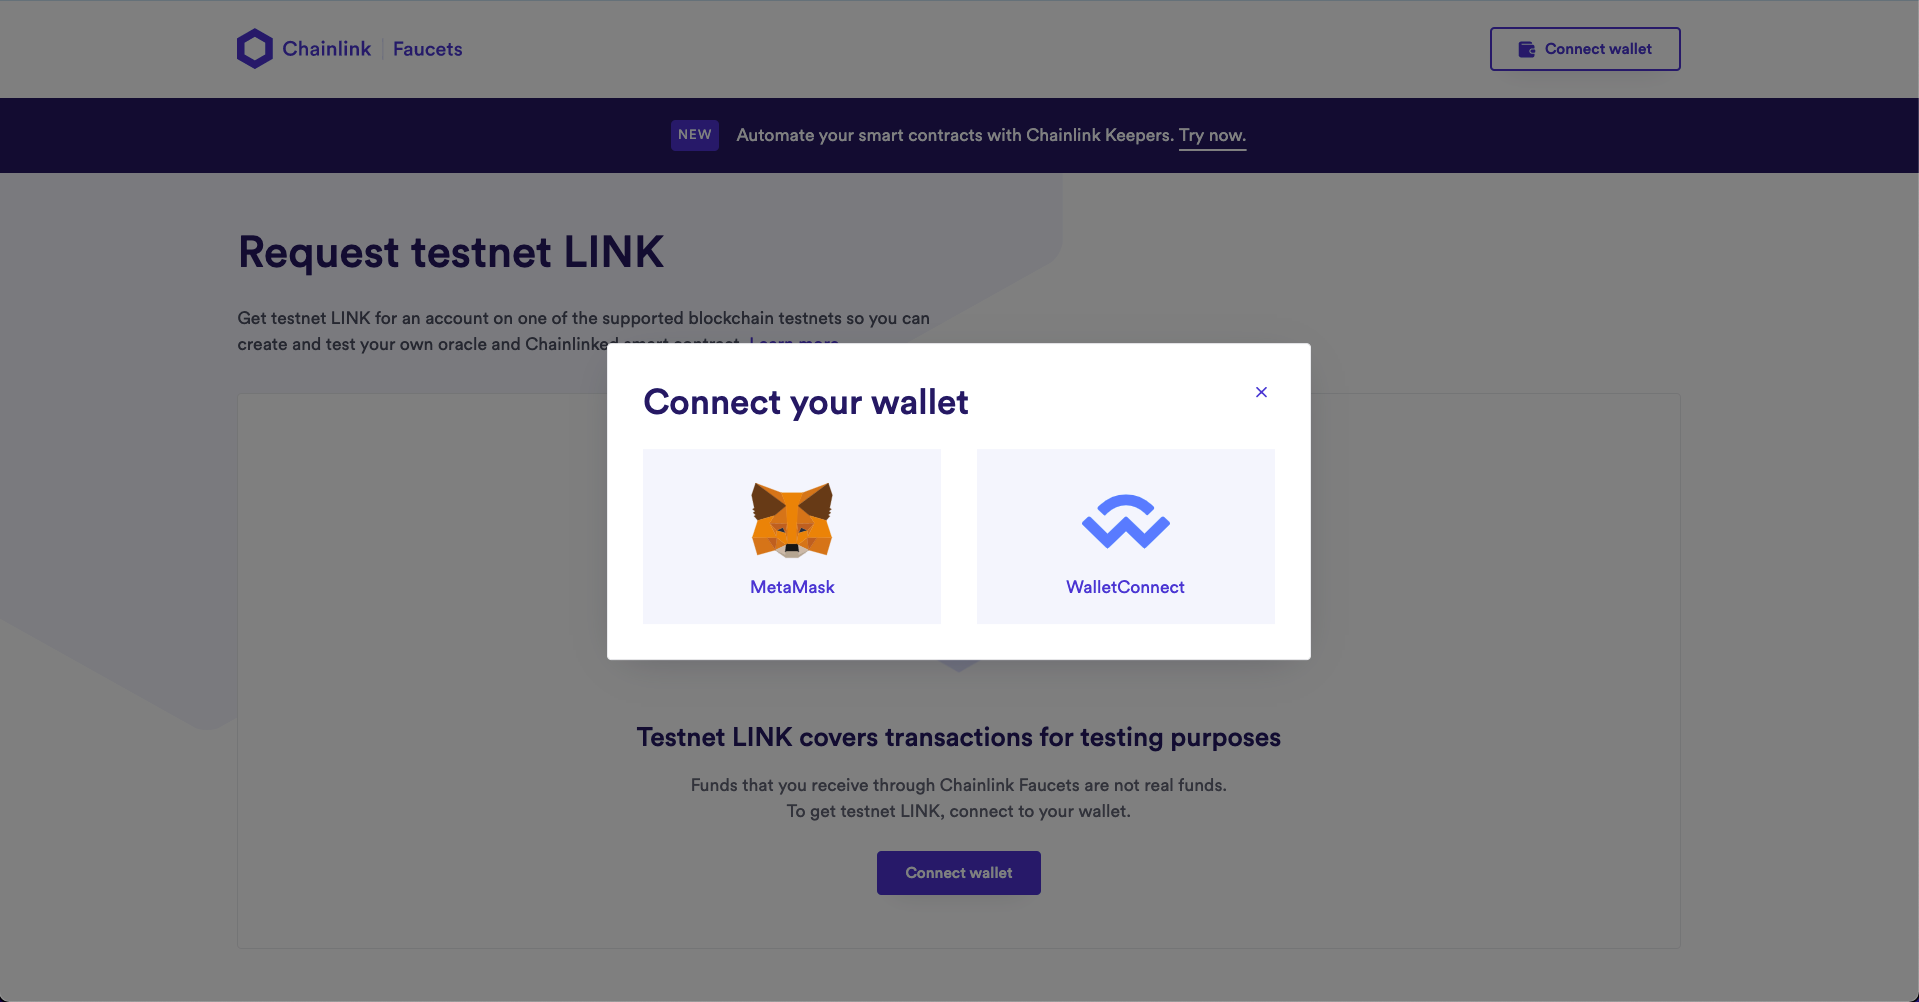 Connecting to faucets chainlink with metamask